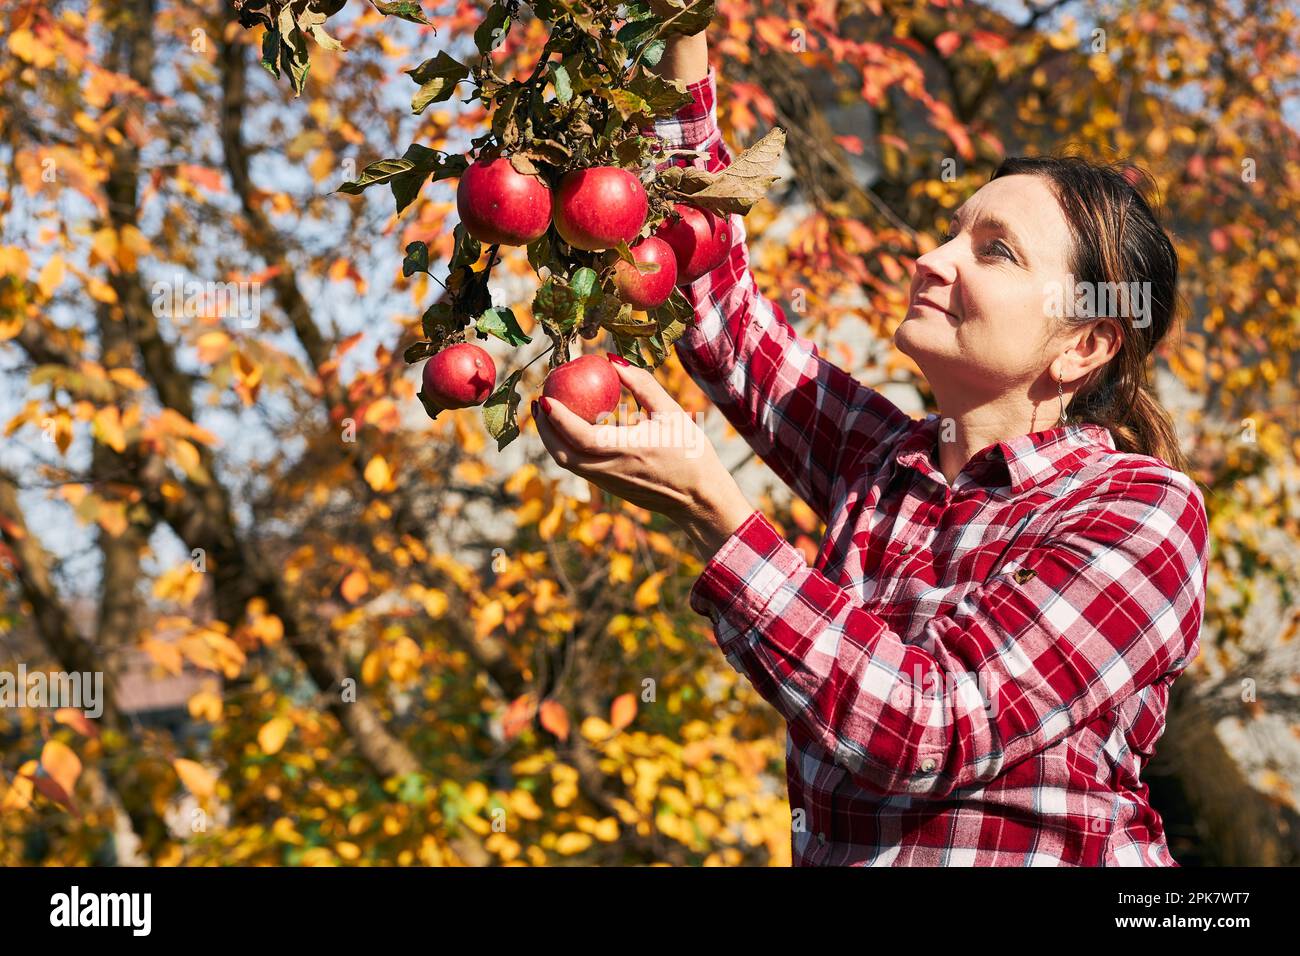 Woman Picking Ripe Apples On Farm Farmer Grabbing Apples From Tree In Orchard Fresh Healthy 7518